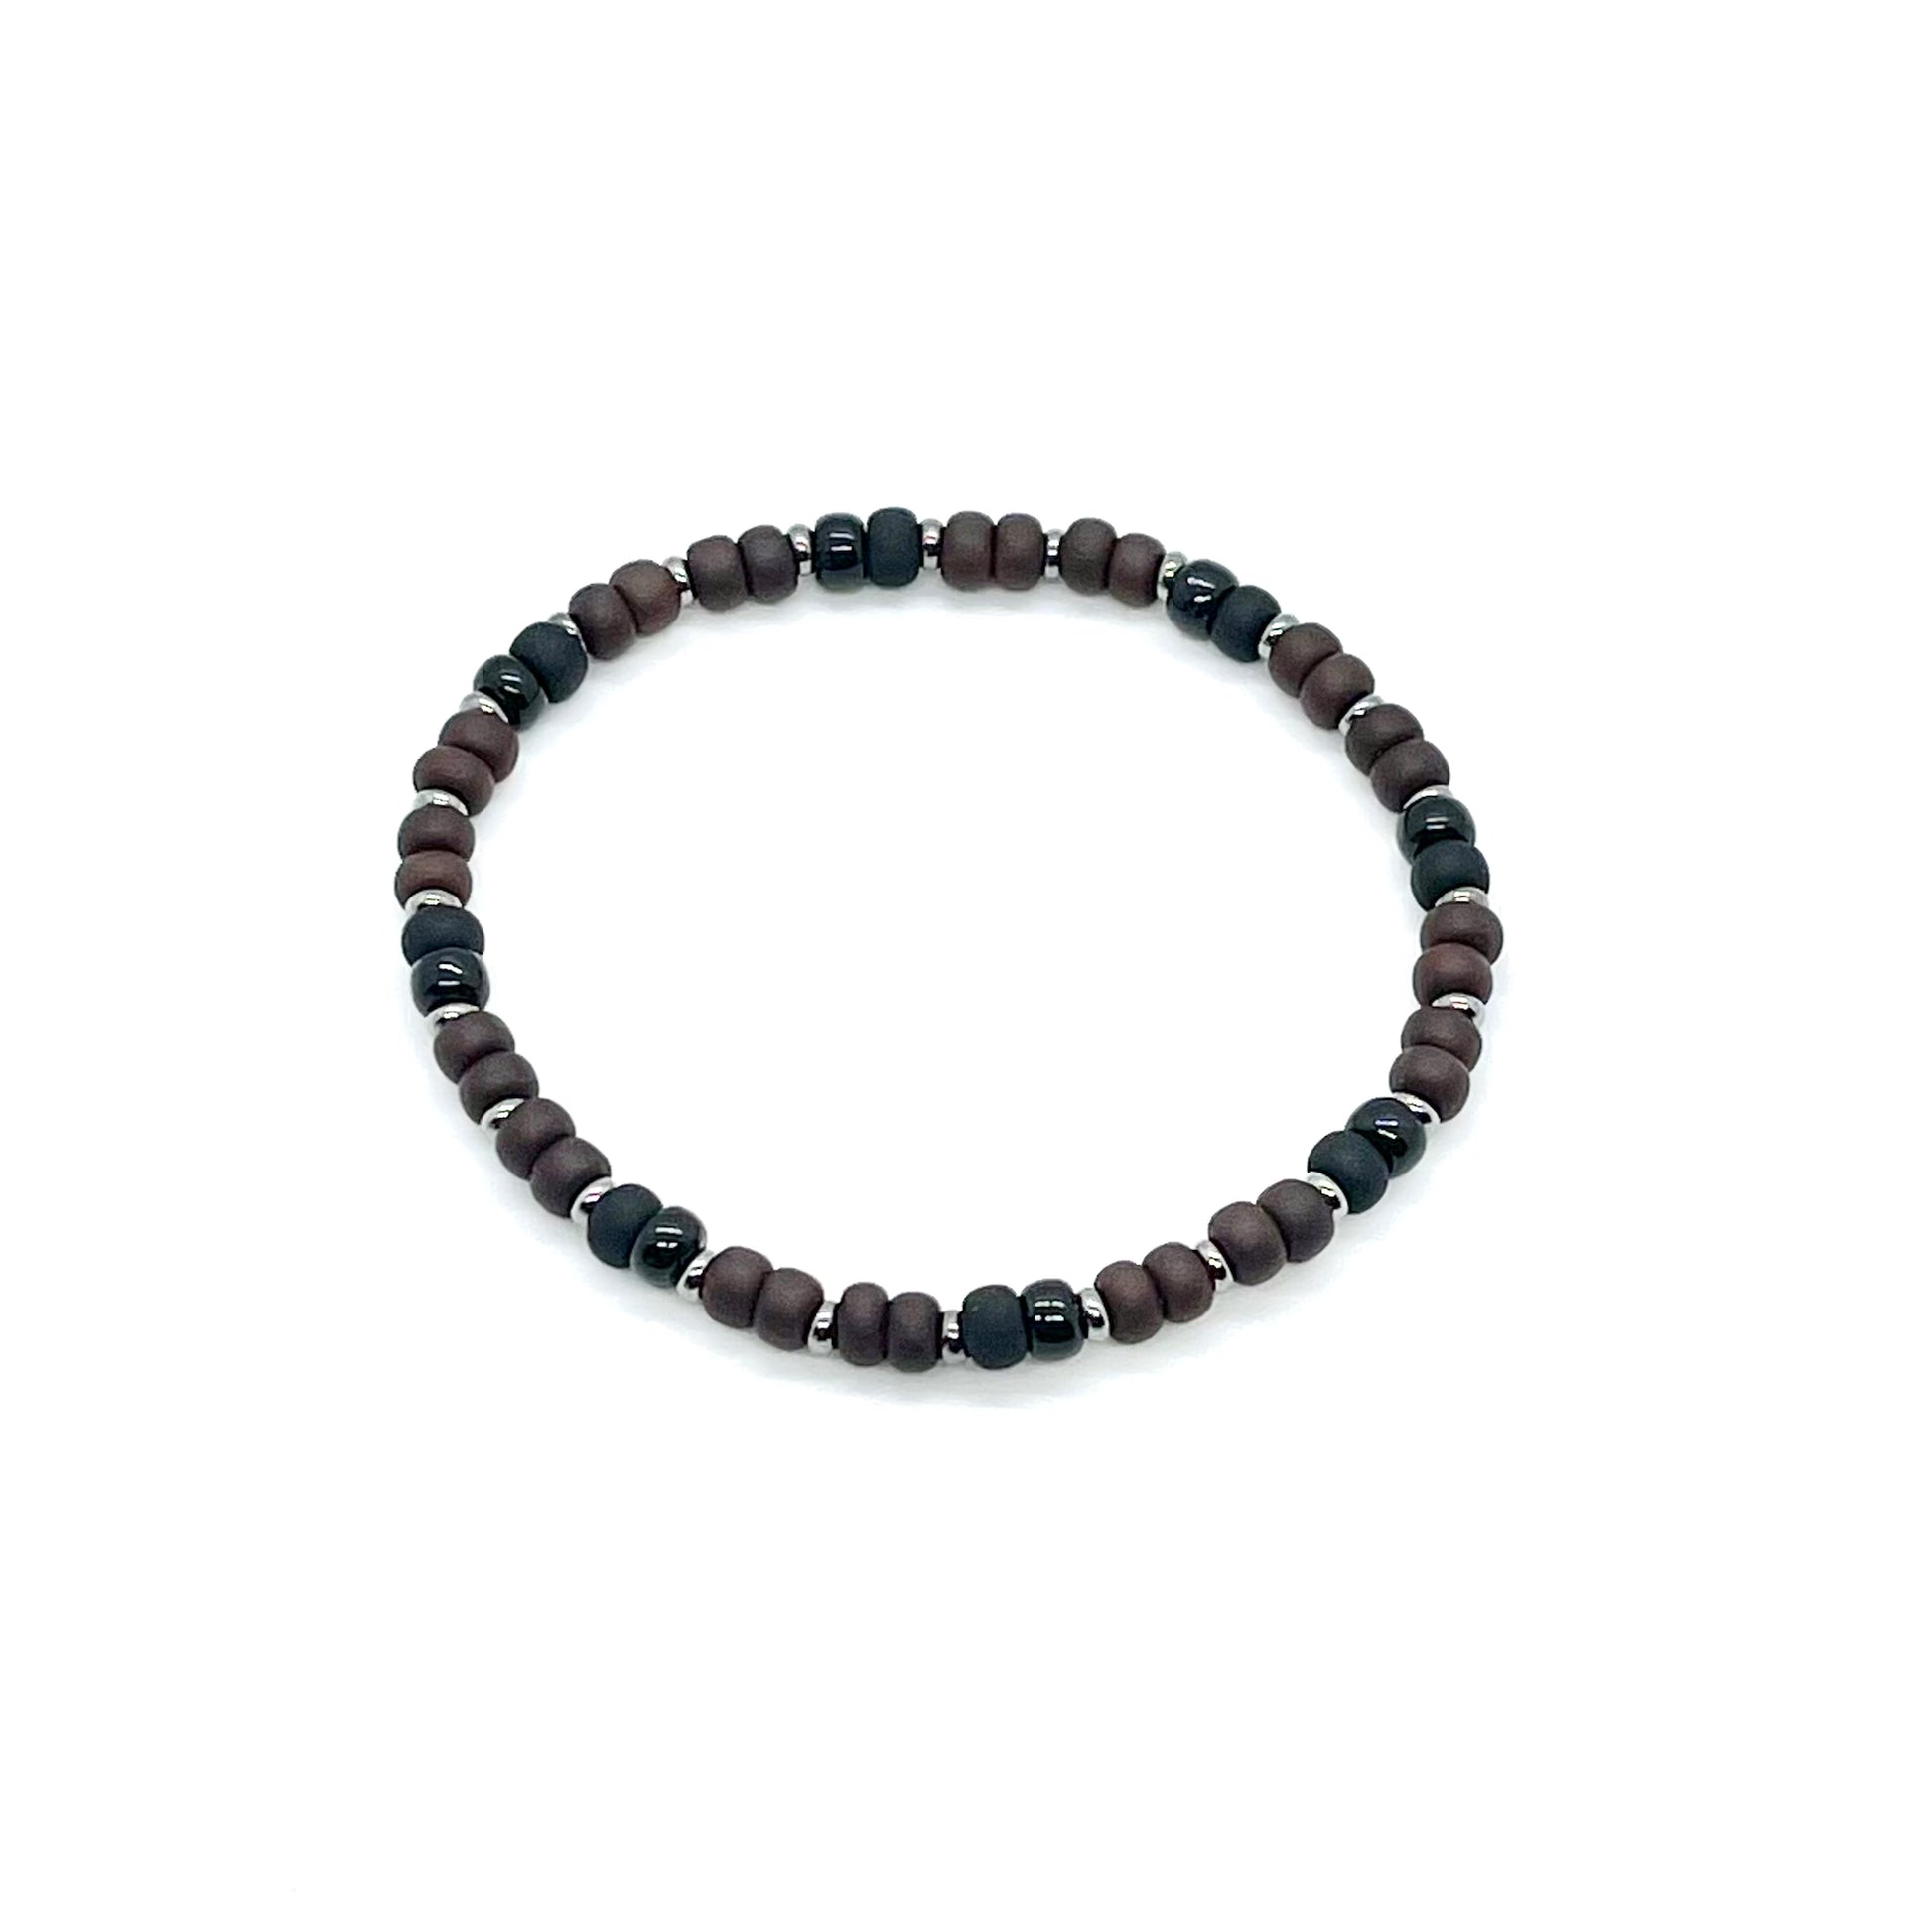 Men's brown beaded bracelet with alternating black seed beads and silver-tone accent disks on elastic stretch cord.